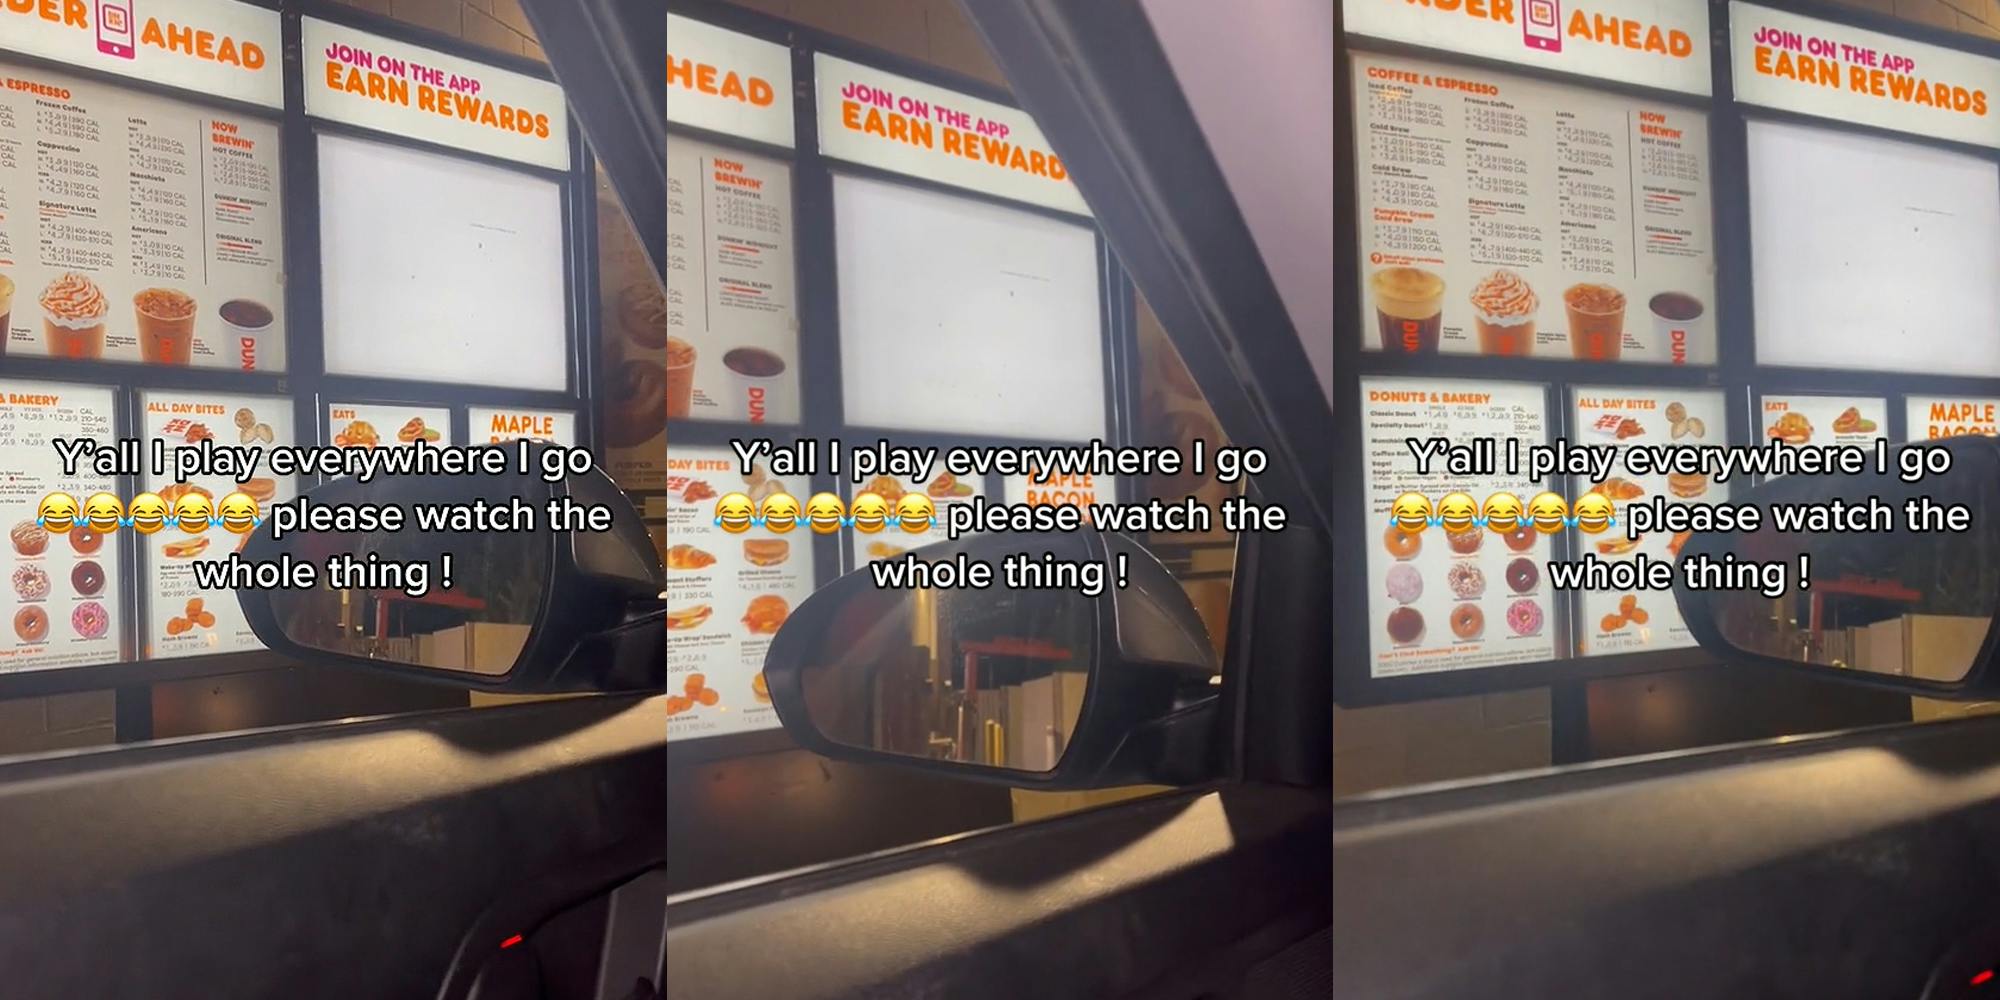 Dunkin' drive thru menu from driver's side window caption "Y'all I play everywhere I go please watch the whole thing !" (l) Dunkin' drive thru menu from driver's side window caption "Y'all I play everywhere I go please watch the whole thing !" (c) Dunkin' drive thru menu from driver's side window caption "Y'all I play everywhere I go please watch the whole thing !" (r)